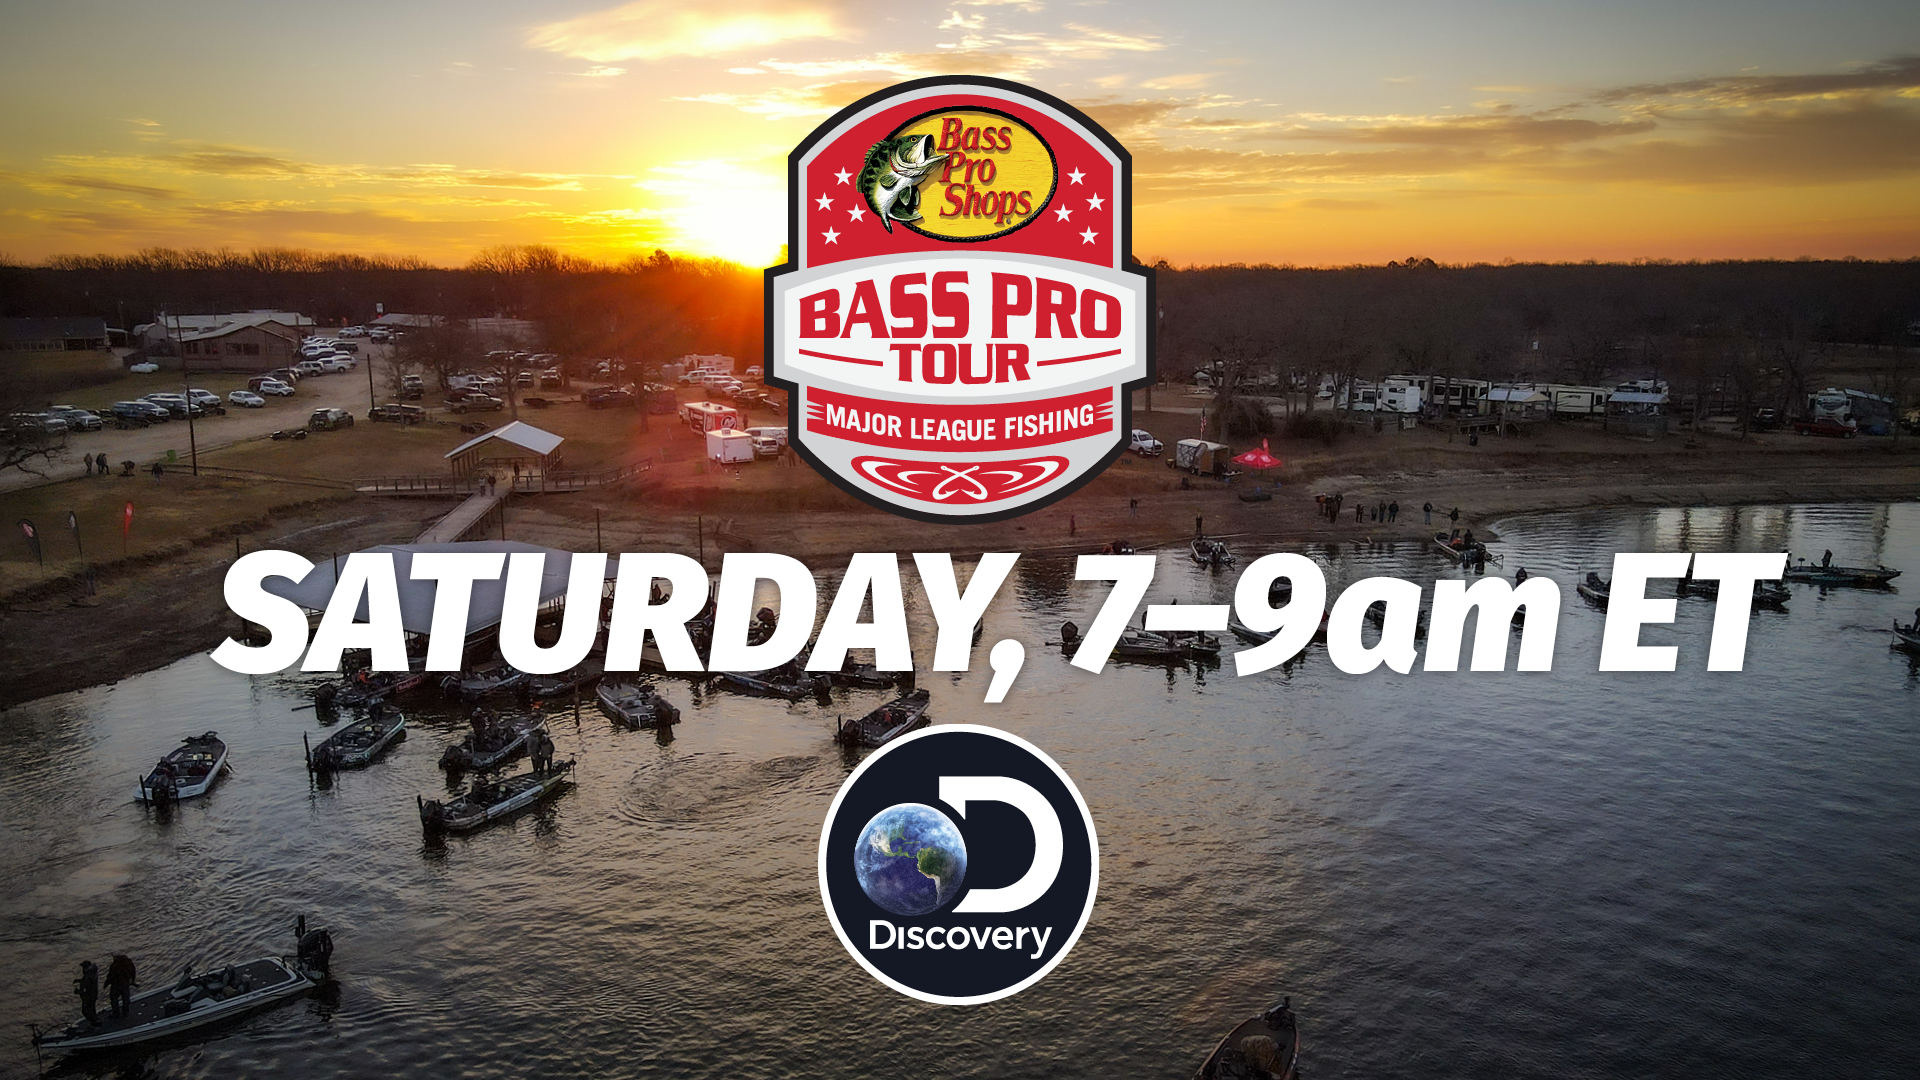 Bass Pro Tour to Premiere Saturday on Discovery Channel - Major League  Fishing